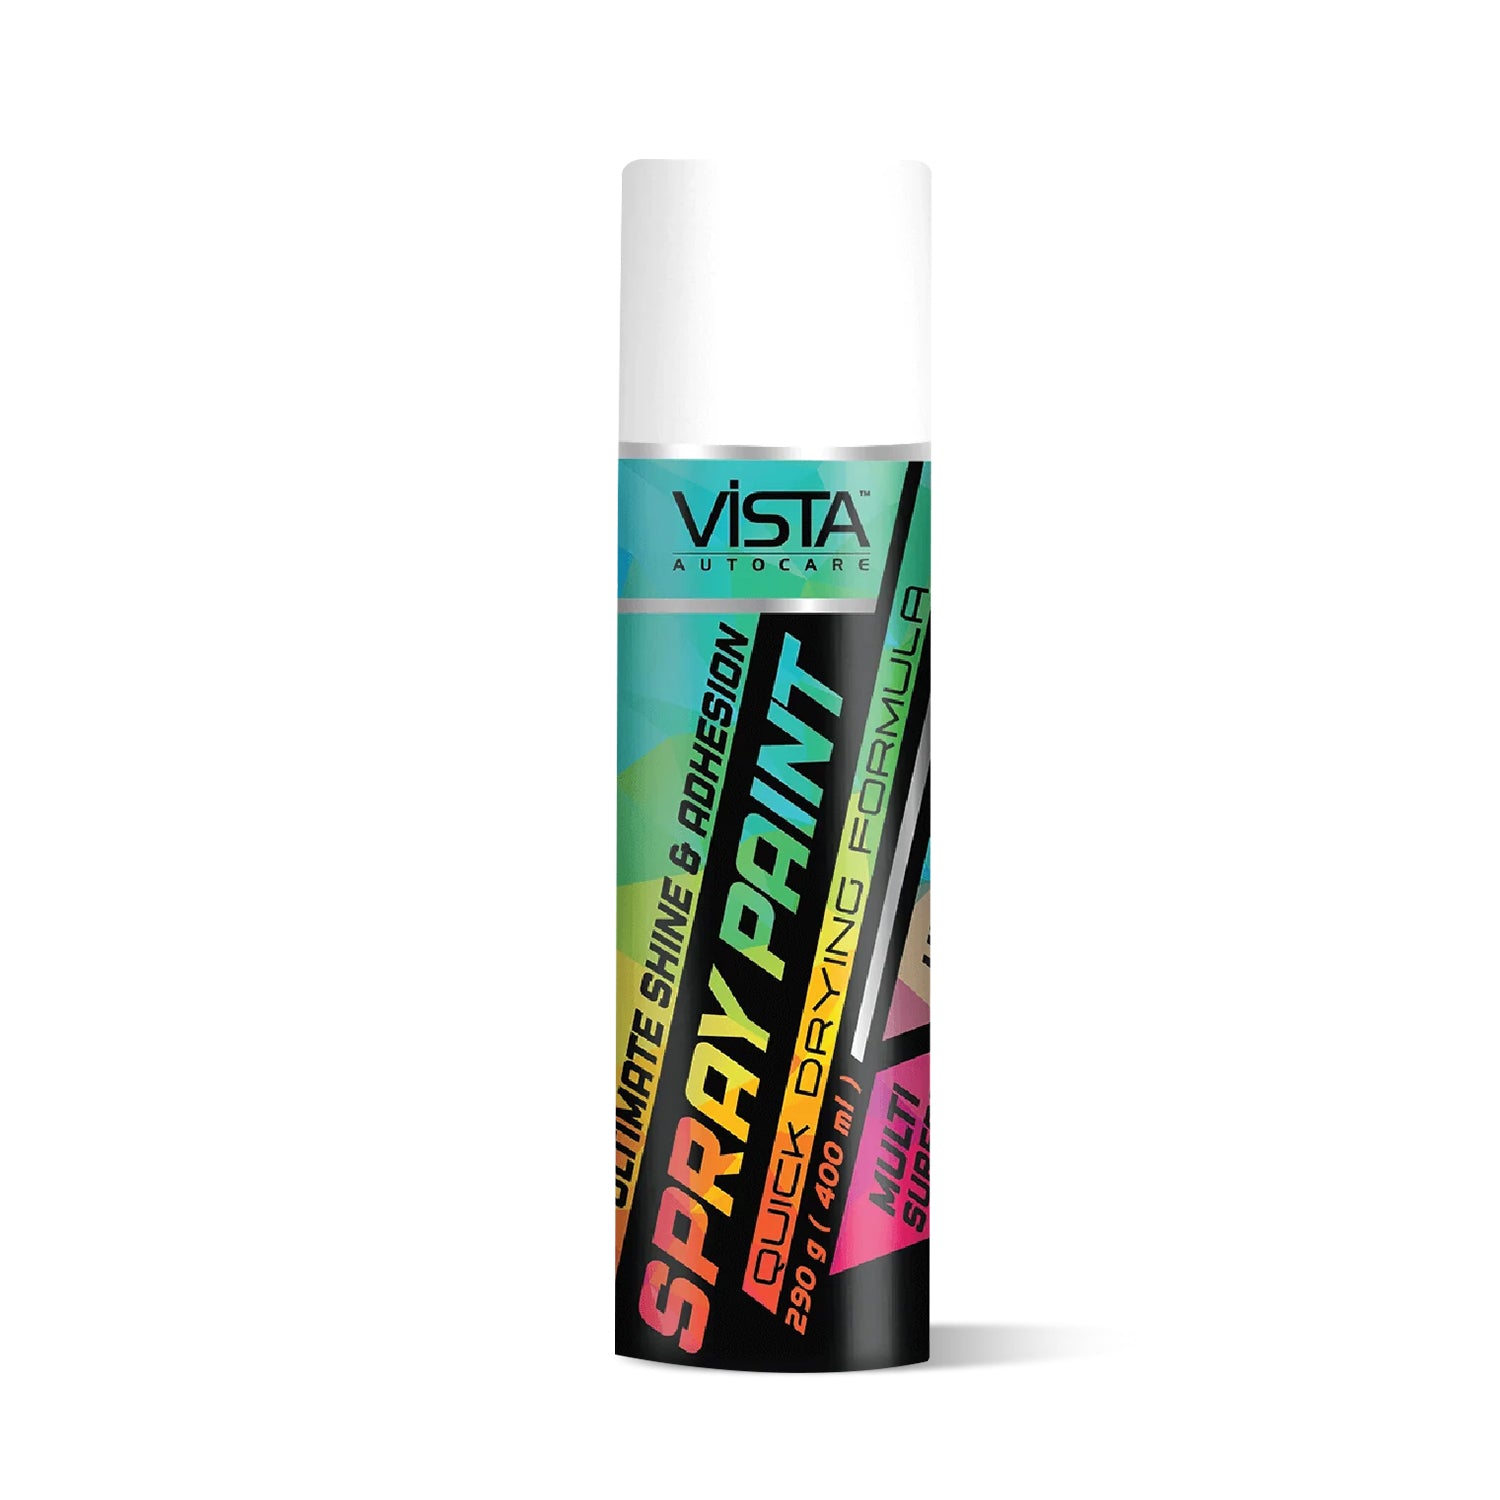 Spray Paint 400ml Bestspray Paint Torenew or Change the Color of